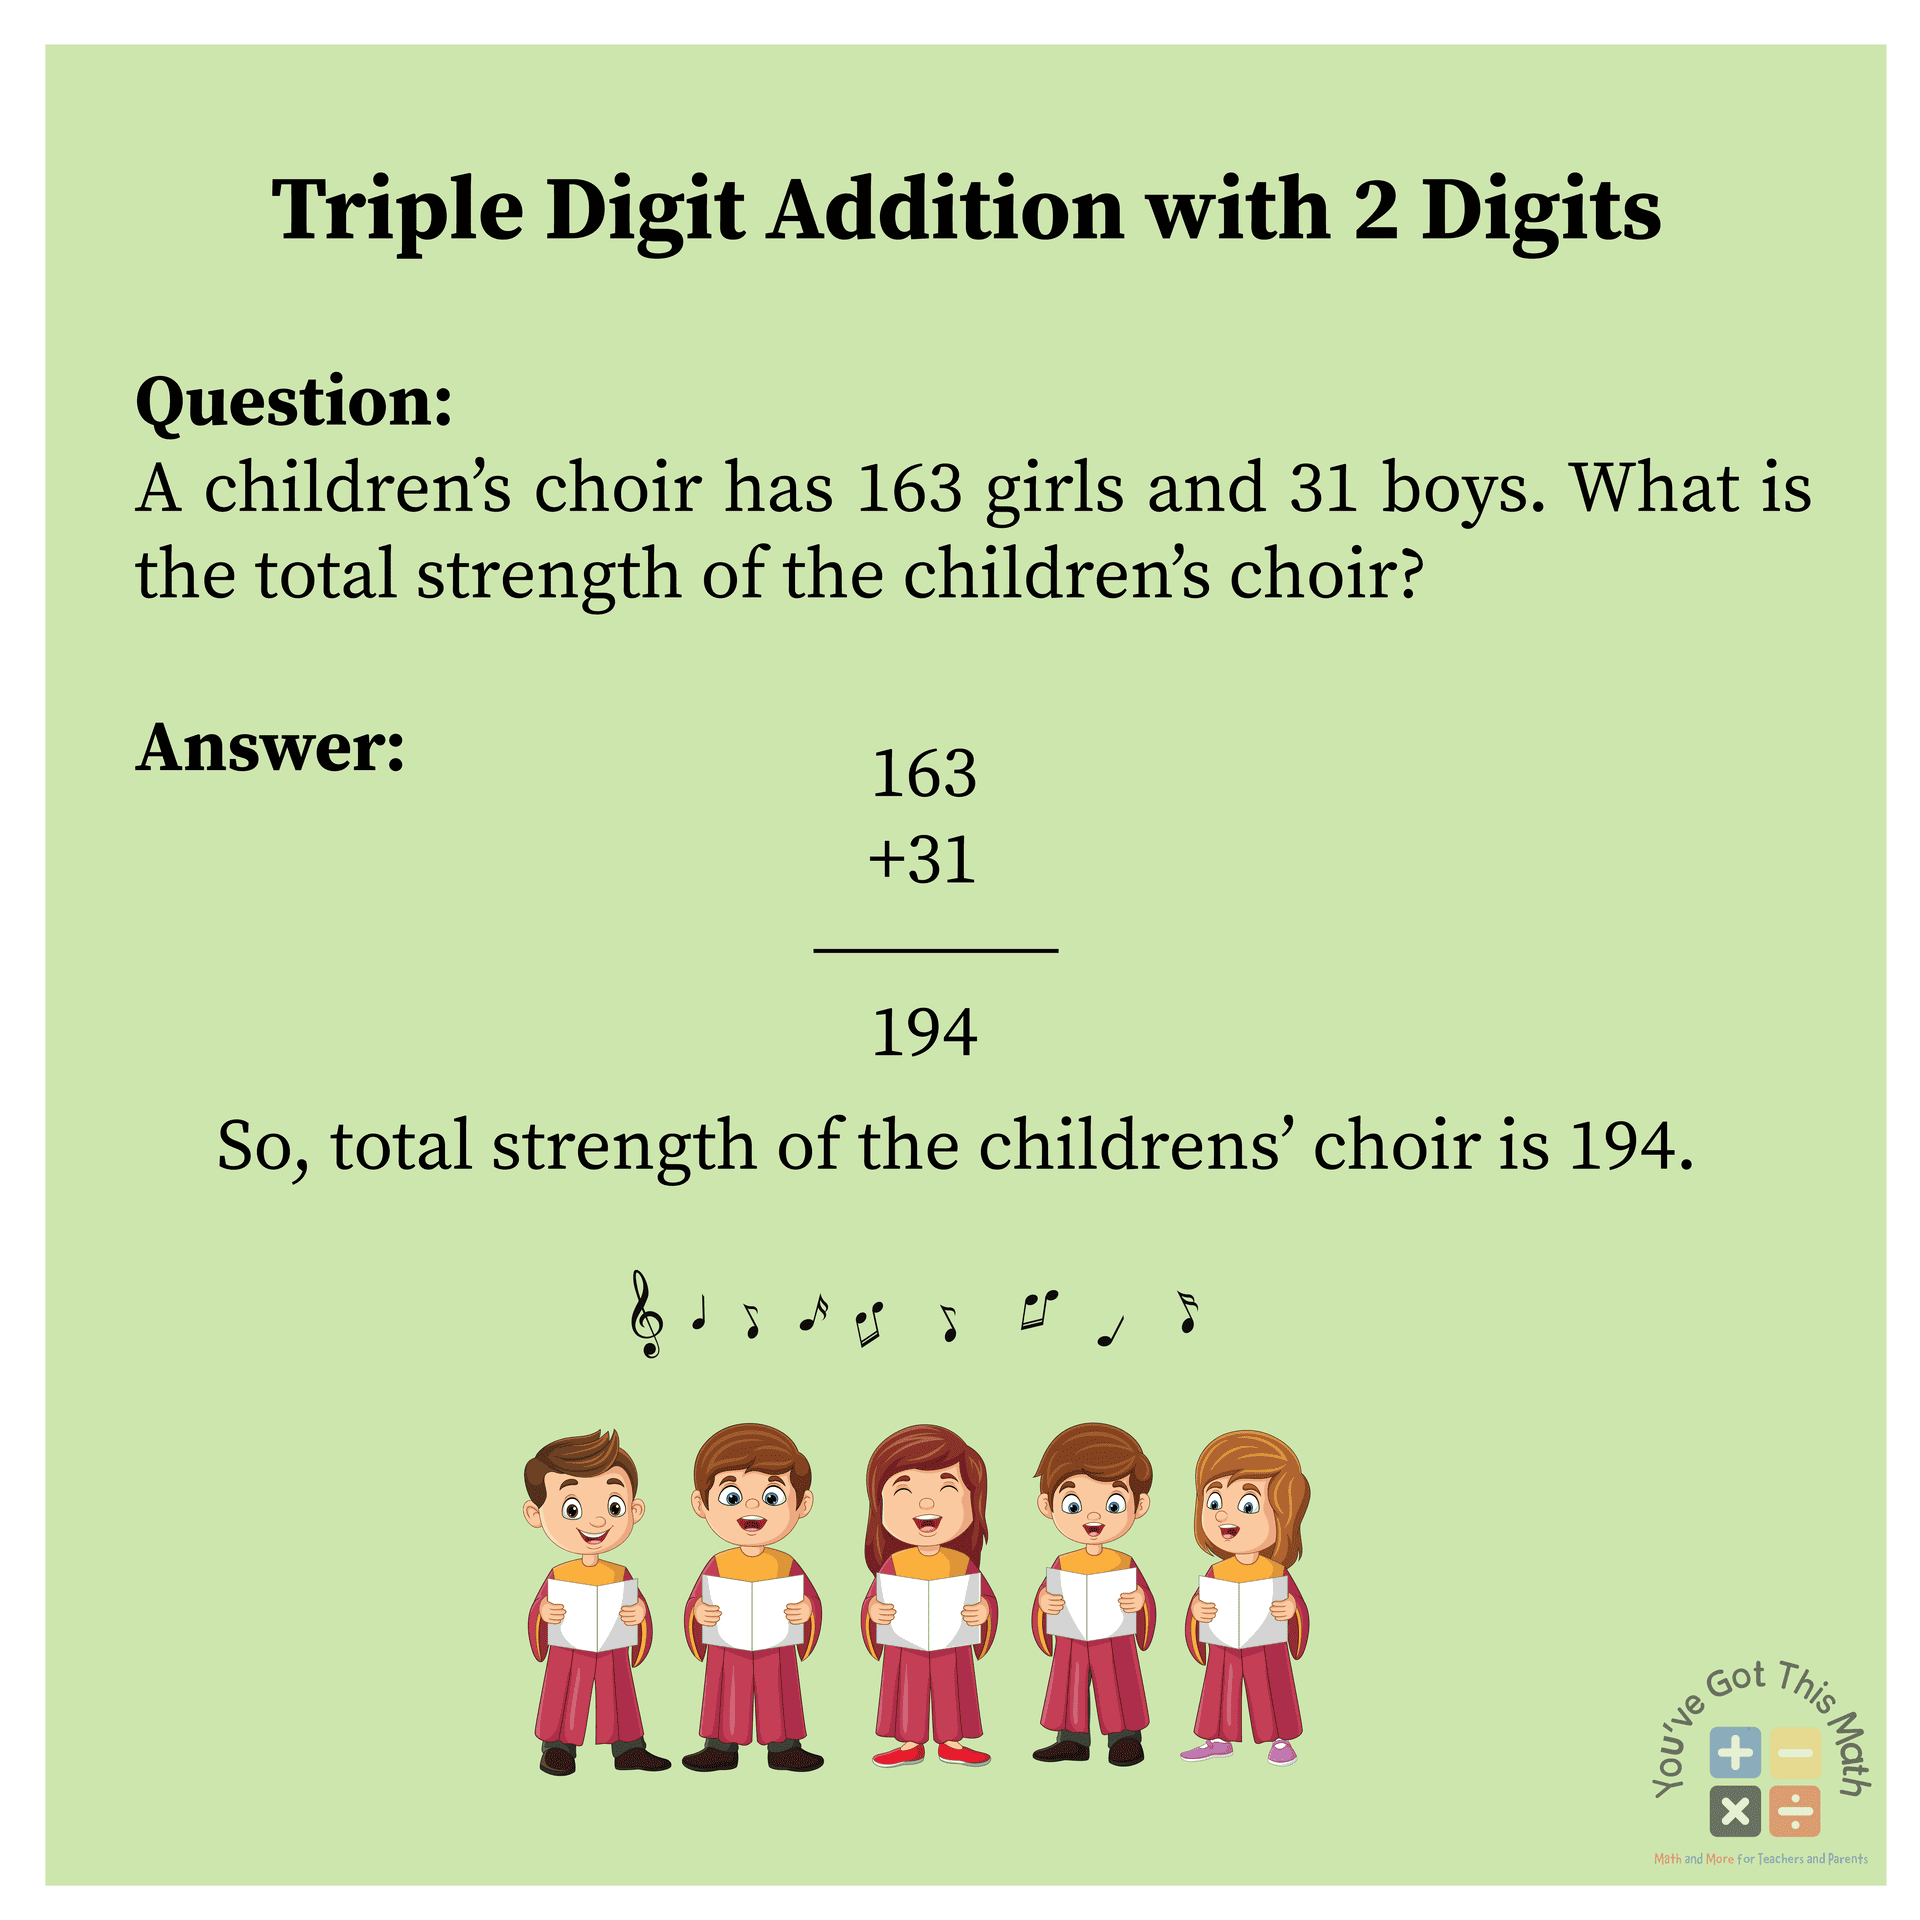 triple Digit addition with 2 digits multi digit addition word problems